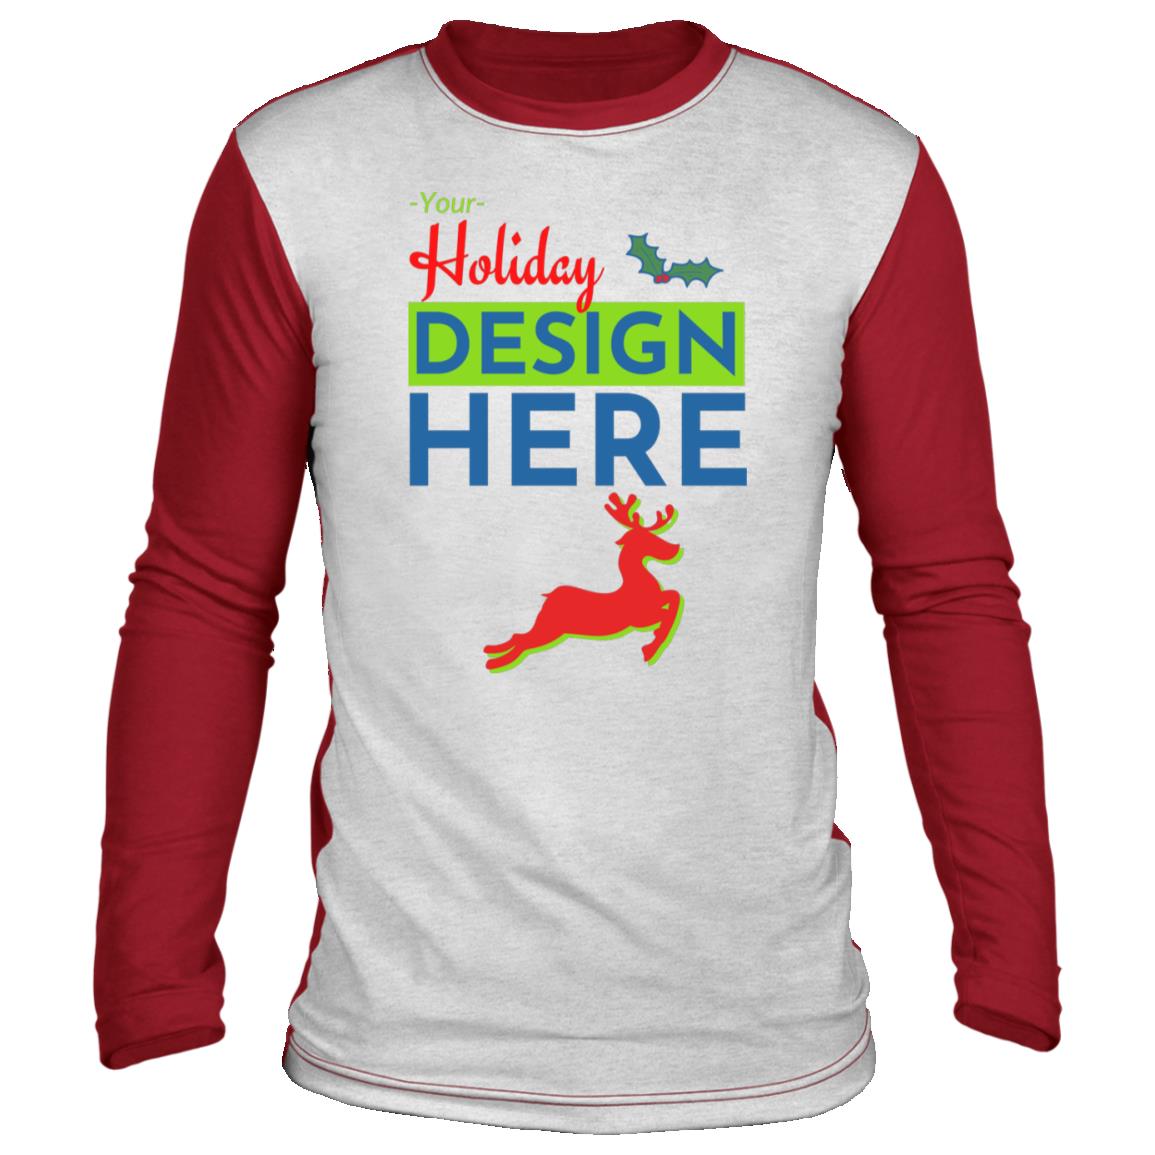 YDH-Holiday-RDeer-SCLS Sublimated Long Sleeve Shirt